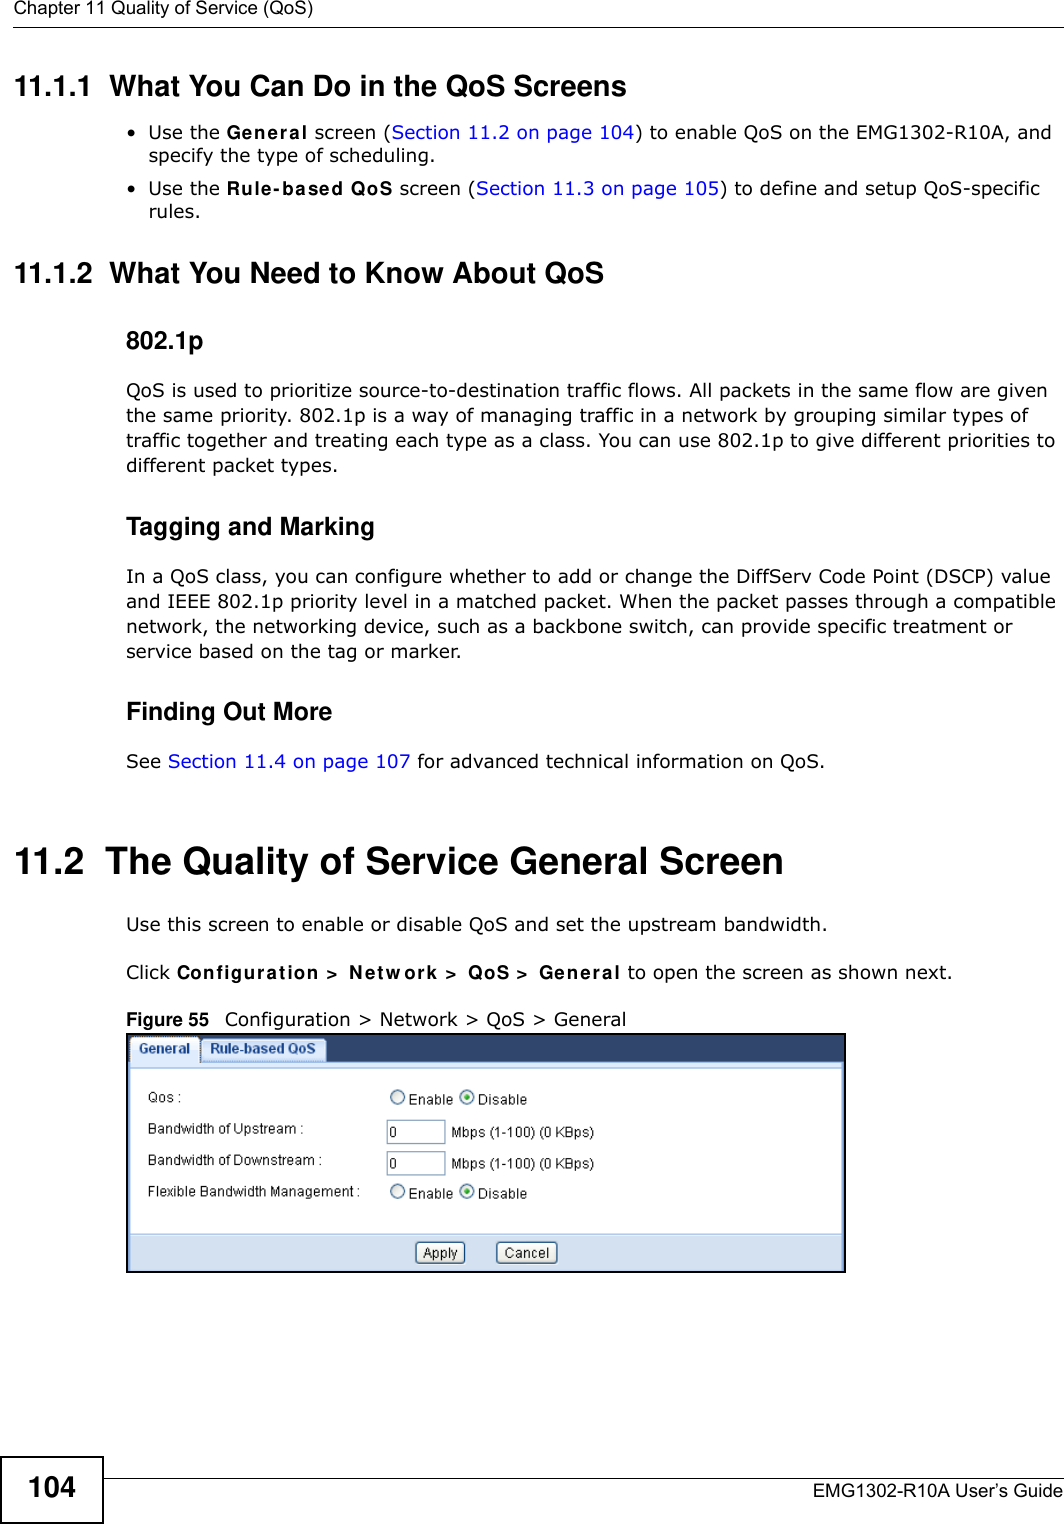 Chapter 11 Quality of Service (QoS)EMG1302-R10A User’s Guide10411.1.1  What You Can Do in the QoS Screens•Use the Ge n e r al screen (Section 11.2 on page 104) to enable QoS on the EMG1302-R10A, and specify the type of scheduling.•Use the Rule - based QoS screen (Section 11.3 on page 105) to define and setup QoS-specific rules.11.1.2  What You Need to Know About QoS802.1pQoS is used to prioritize source-to-destination traffic flows. All packets in the same flow are given the same priority. 802.1p is a way of managing traffic in a network by grouping similar types of traffic together and treating each type as a class. You can use 802.1p to give different priorities to different packet types. Tagging and MarkingIn a QoS class, you can configure whether to add or change the DiffServ Code Point (DSCP) value and IEEE 802.1p priority level in a matched packet. When the packet passes through a compatible network, the networking device, such as a backbone switch, can provide specific treatment or service based on the tag or marker.Finding Out MoreSee Section 11.4 on page 107 for advanced technical information on QoS.11.2  The Quality of Service General ScreenUse this screen to enable or disable QoS and set the upstream bandwidth.Click Configu r at ion &gt;  N e t w ork &gt;  QoS &gt;  General to open the screen as shown next.Figure 55   Configuration &gt; Network &gt; QoS &gt; General